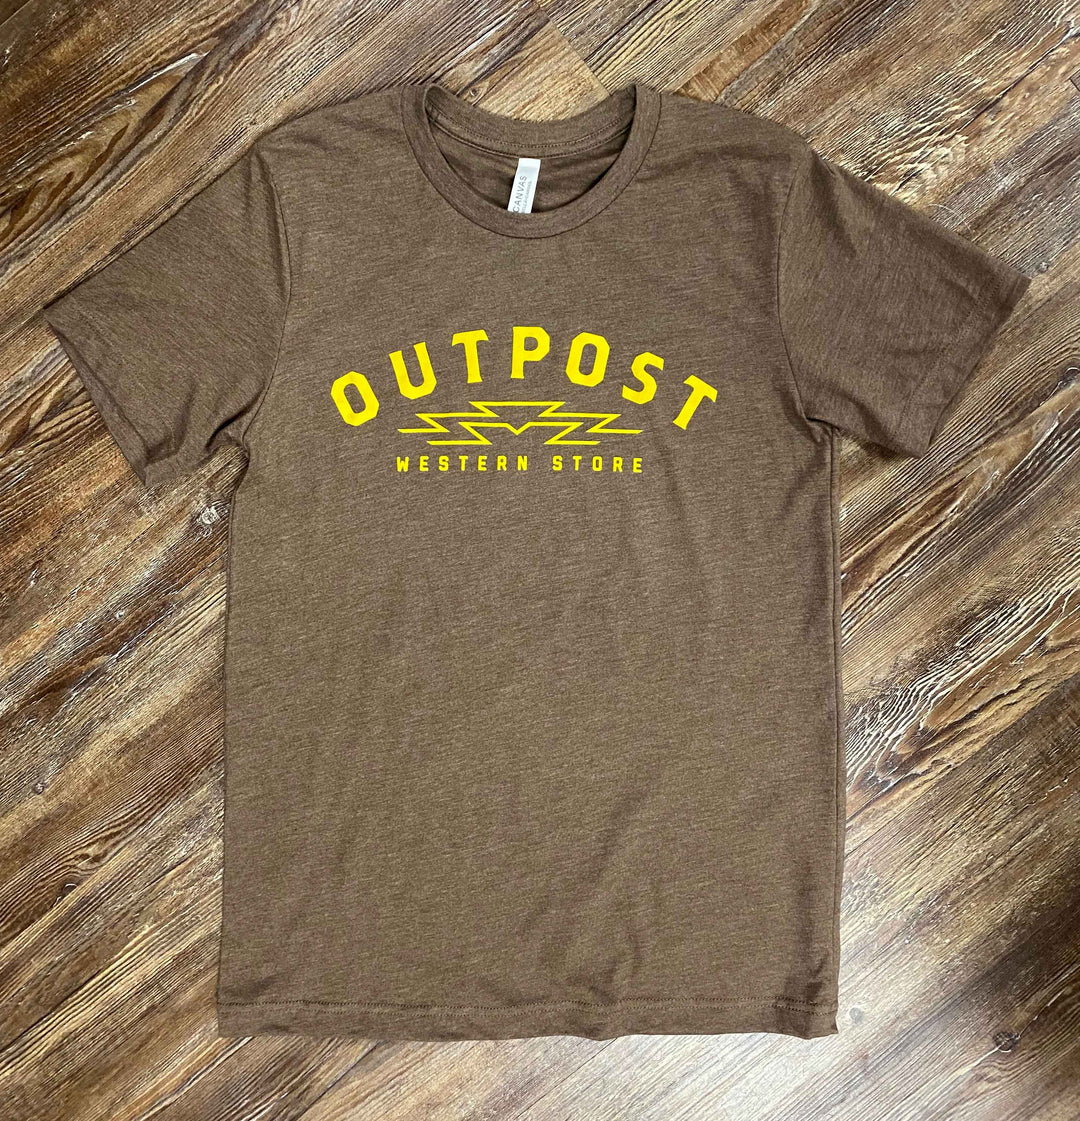 Outpost Logo Sunrise Tee brown heather with yellow gold screen print